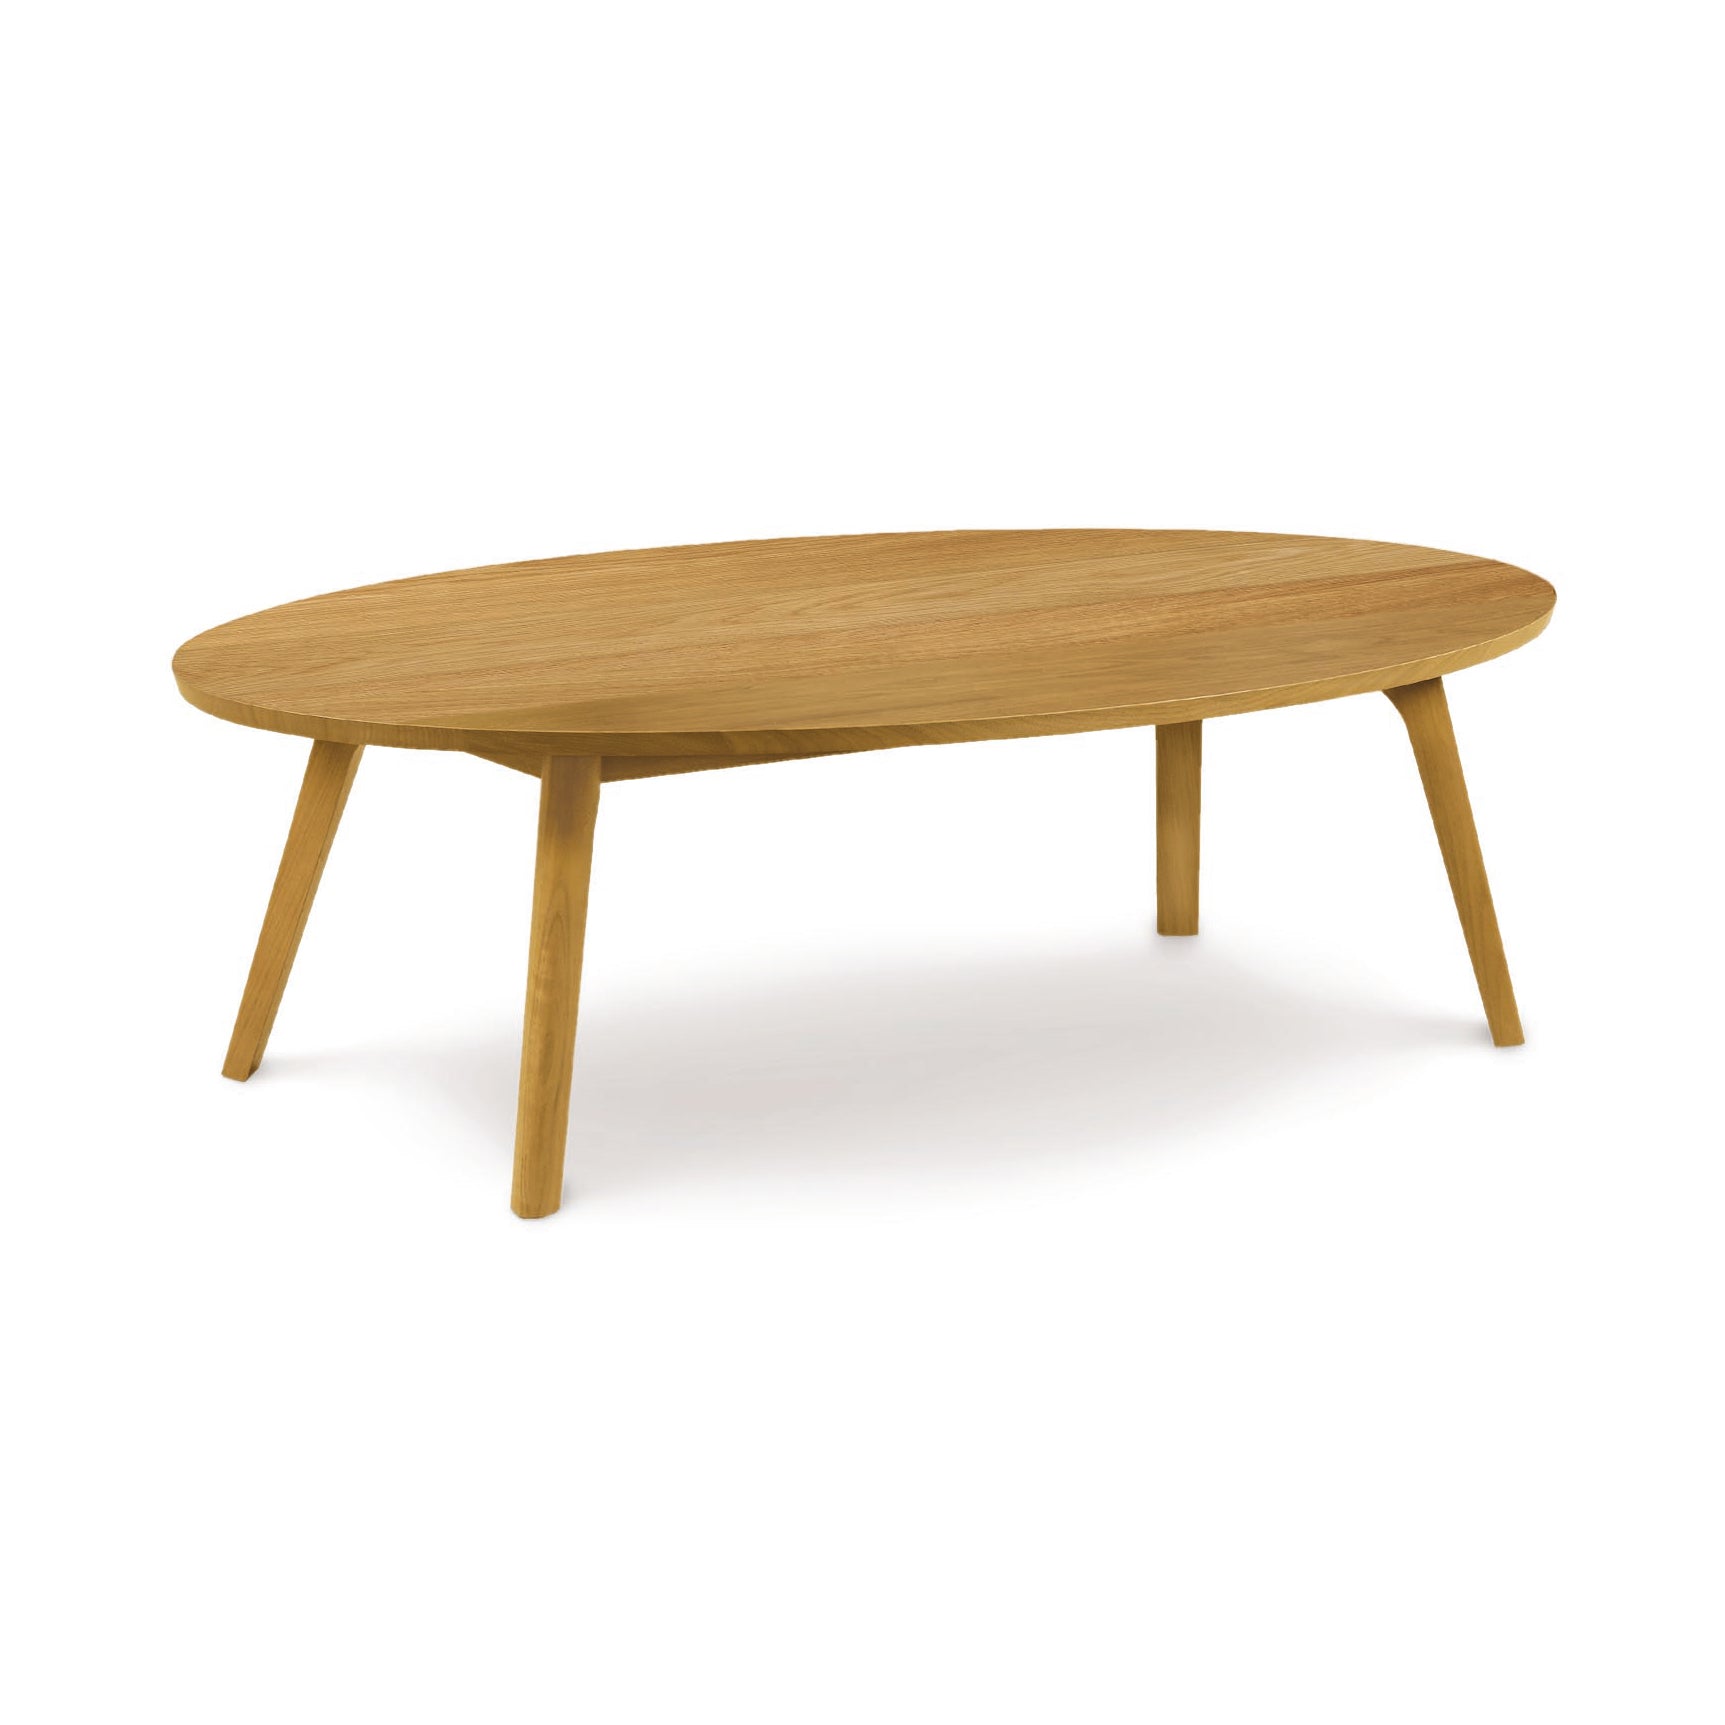 A Copeland Furniture Catalina Oval Coffee Table, crafted from sustainably harvested hardwood with four angled legs, reflects a mid-century American design on a white background.